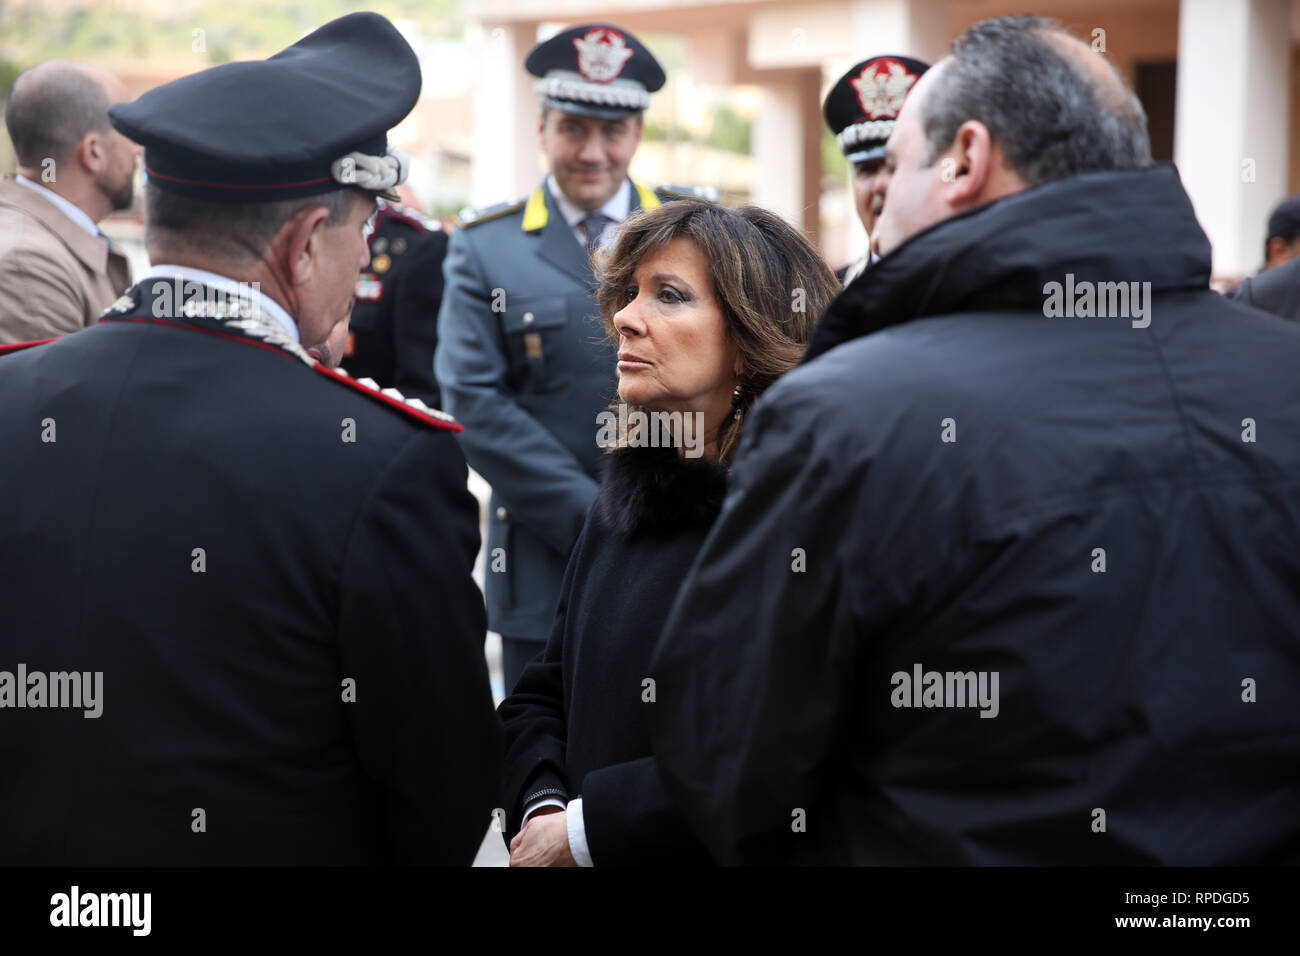 President of the Senate Maria Elisabetta Alberti Casellati during a visit to Palermo, as she pays tribute to Paolo Borsellino at the site of the 1992 massacre in Via D'Amelio  Featuring: Elisabetta Casellati Where: Palermo, Sicily, Italy When: 19 Jan 2019 Credit: IPA/WENN.com  **Only available for publication in UK, USA, Germany, Austria, Switzerland** Stock Photo